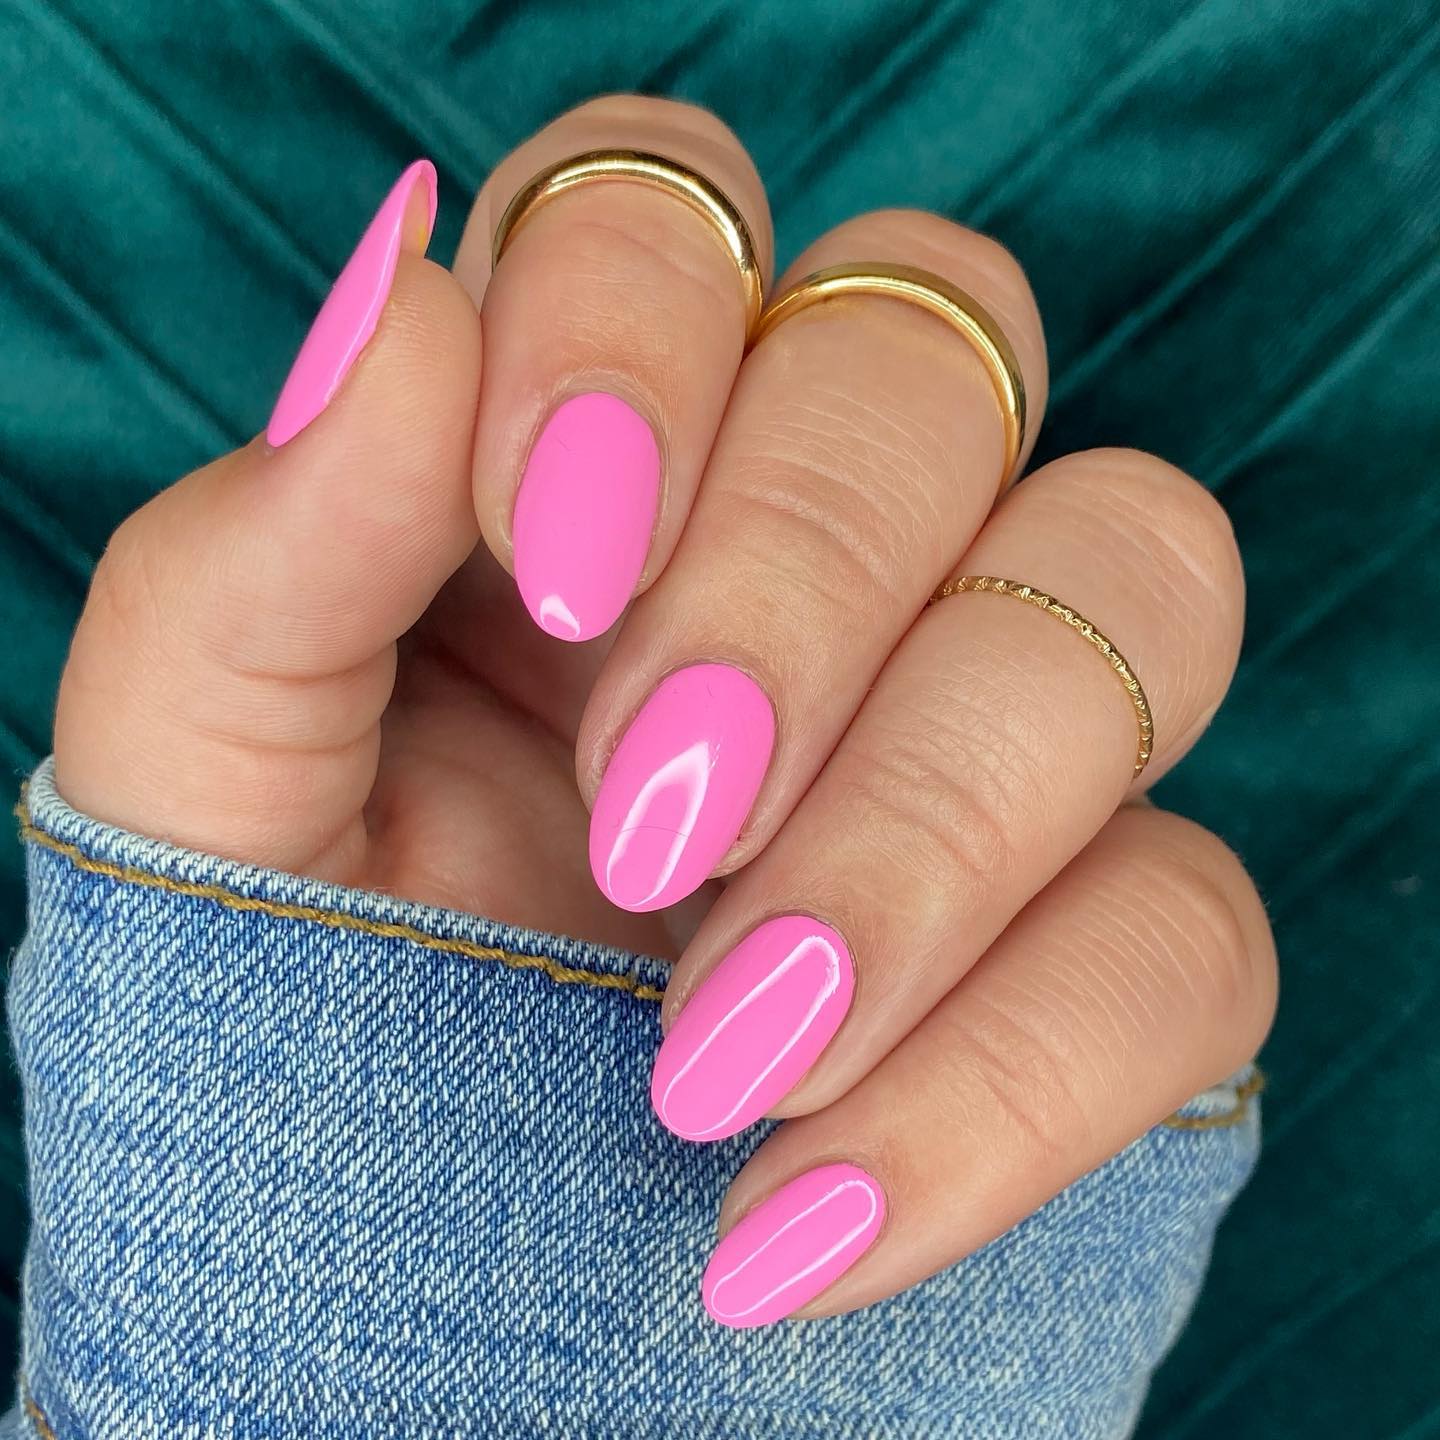 Pink has always been a preferable color for women to apply. All shades of it, especially the baby pink one, is perfect for summer nails.